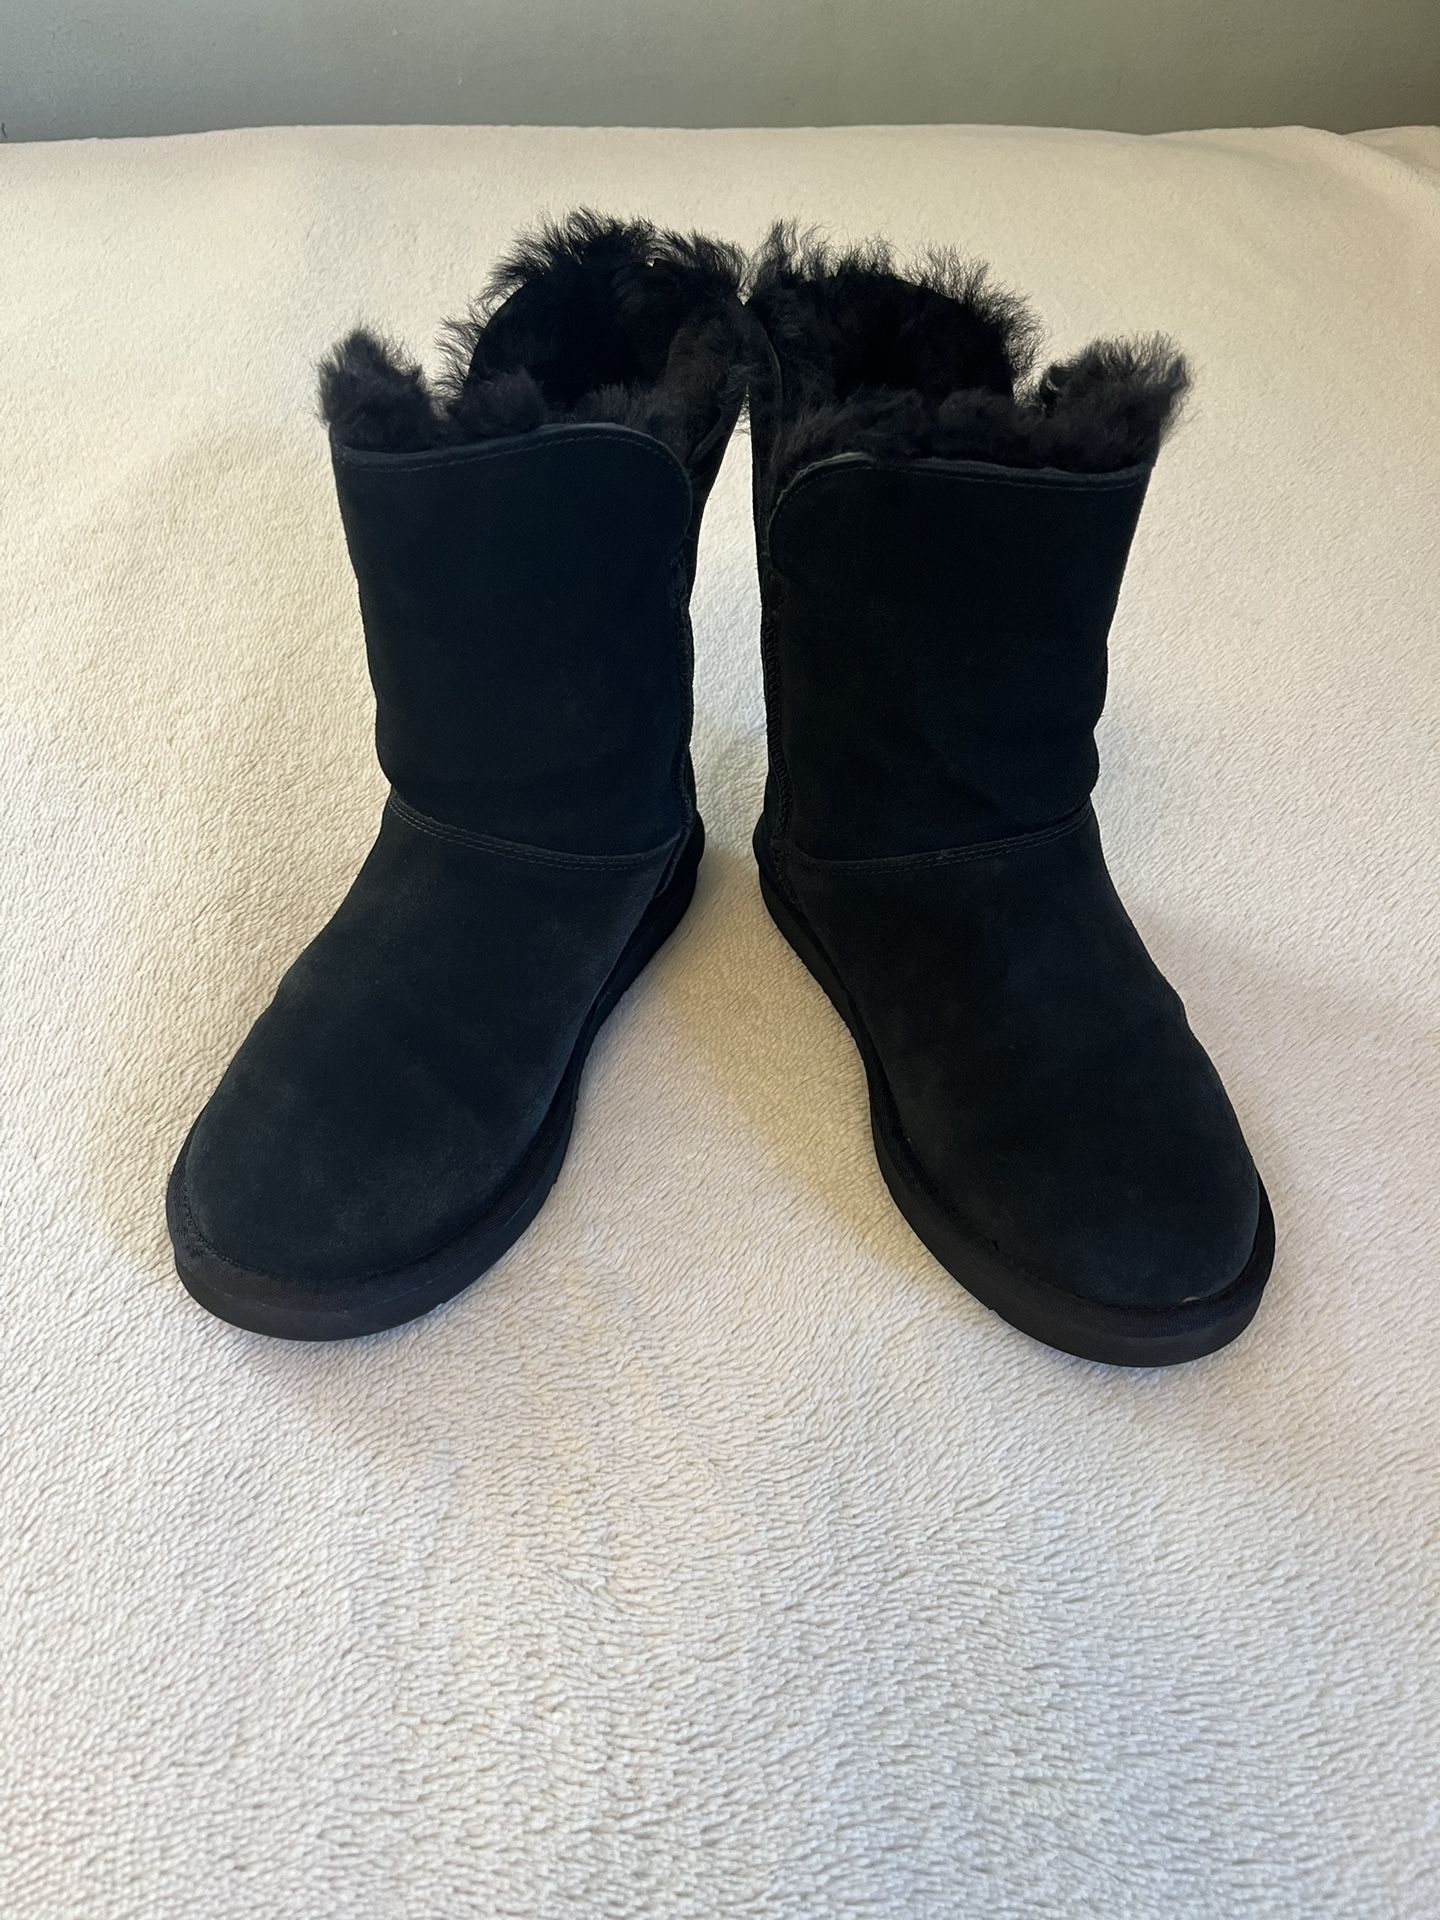 Ugg Women's Black Suede Boots Size 8